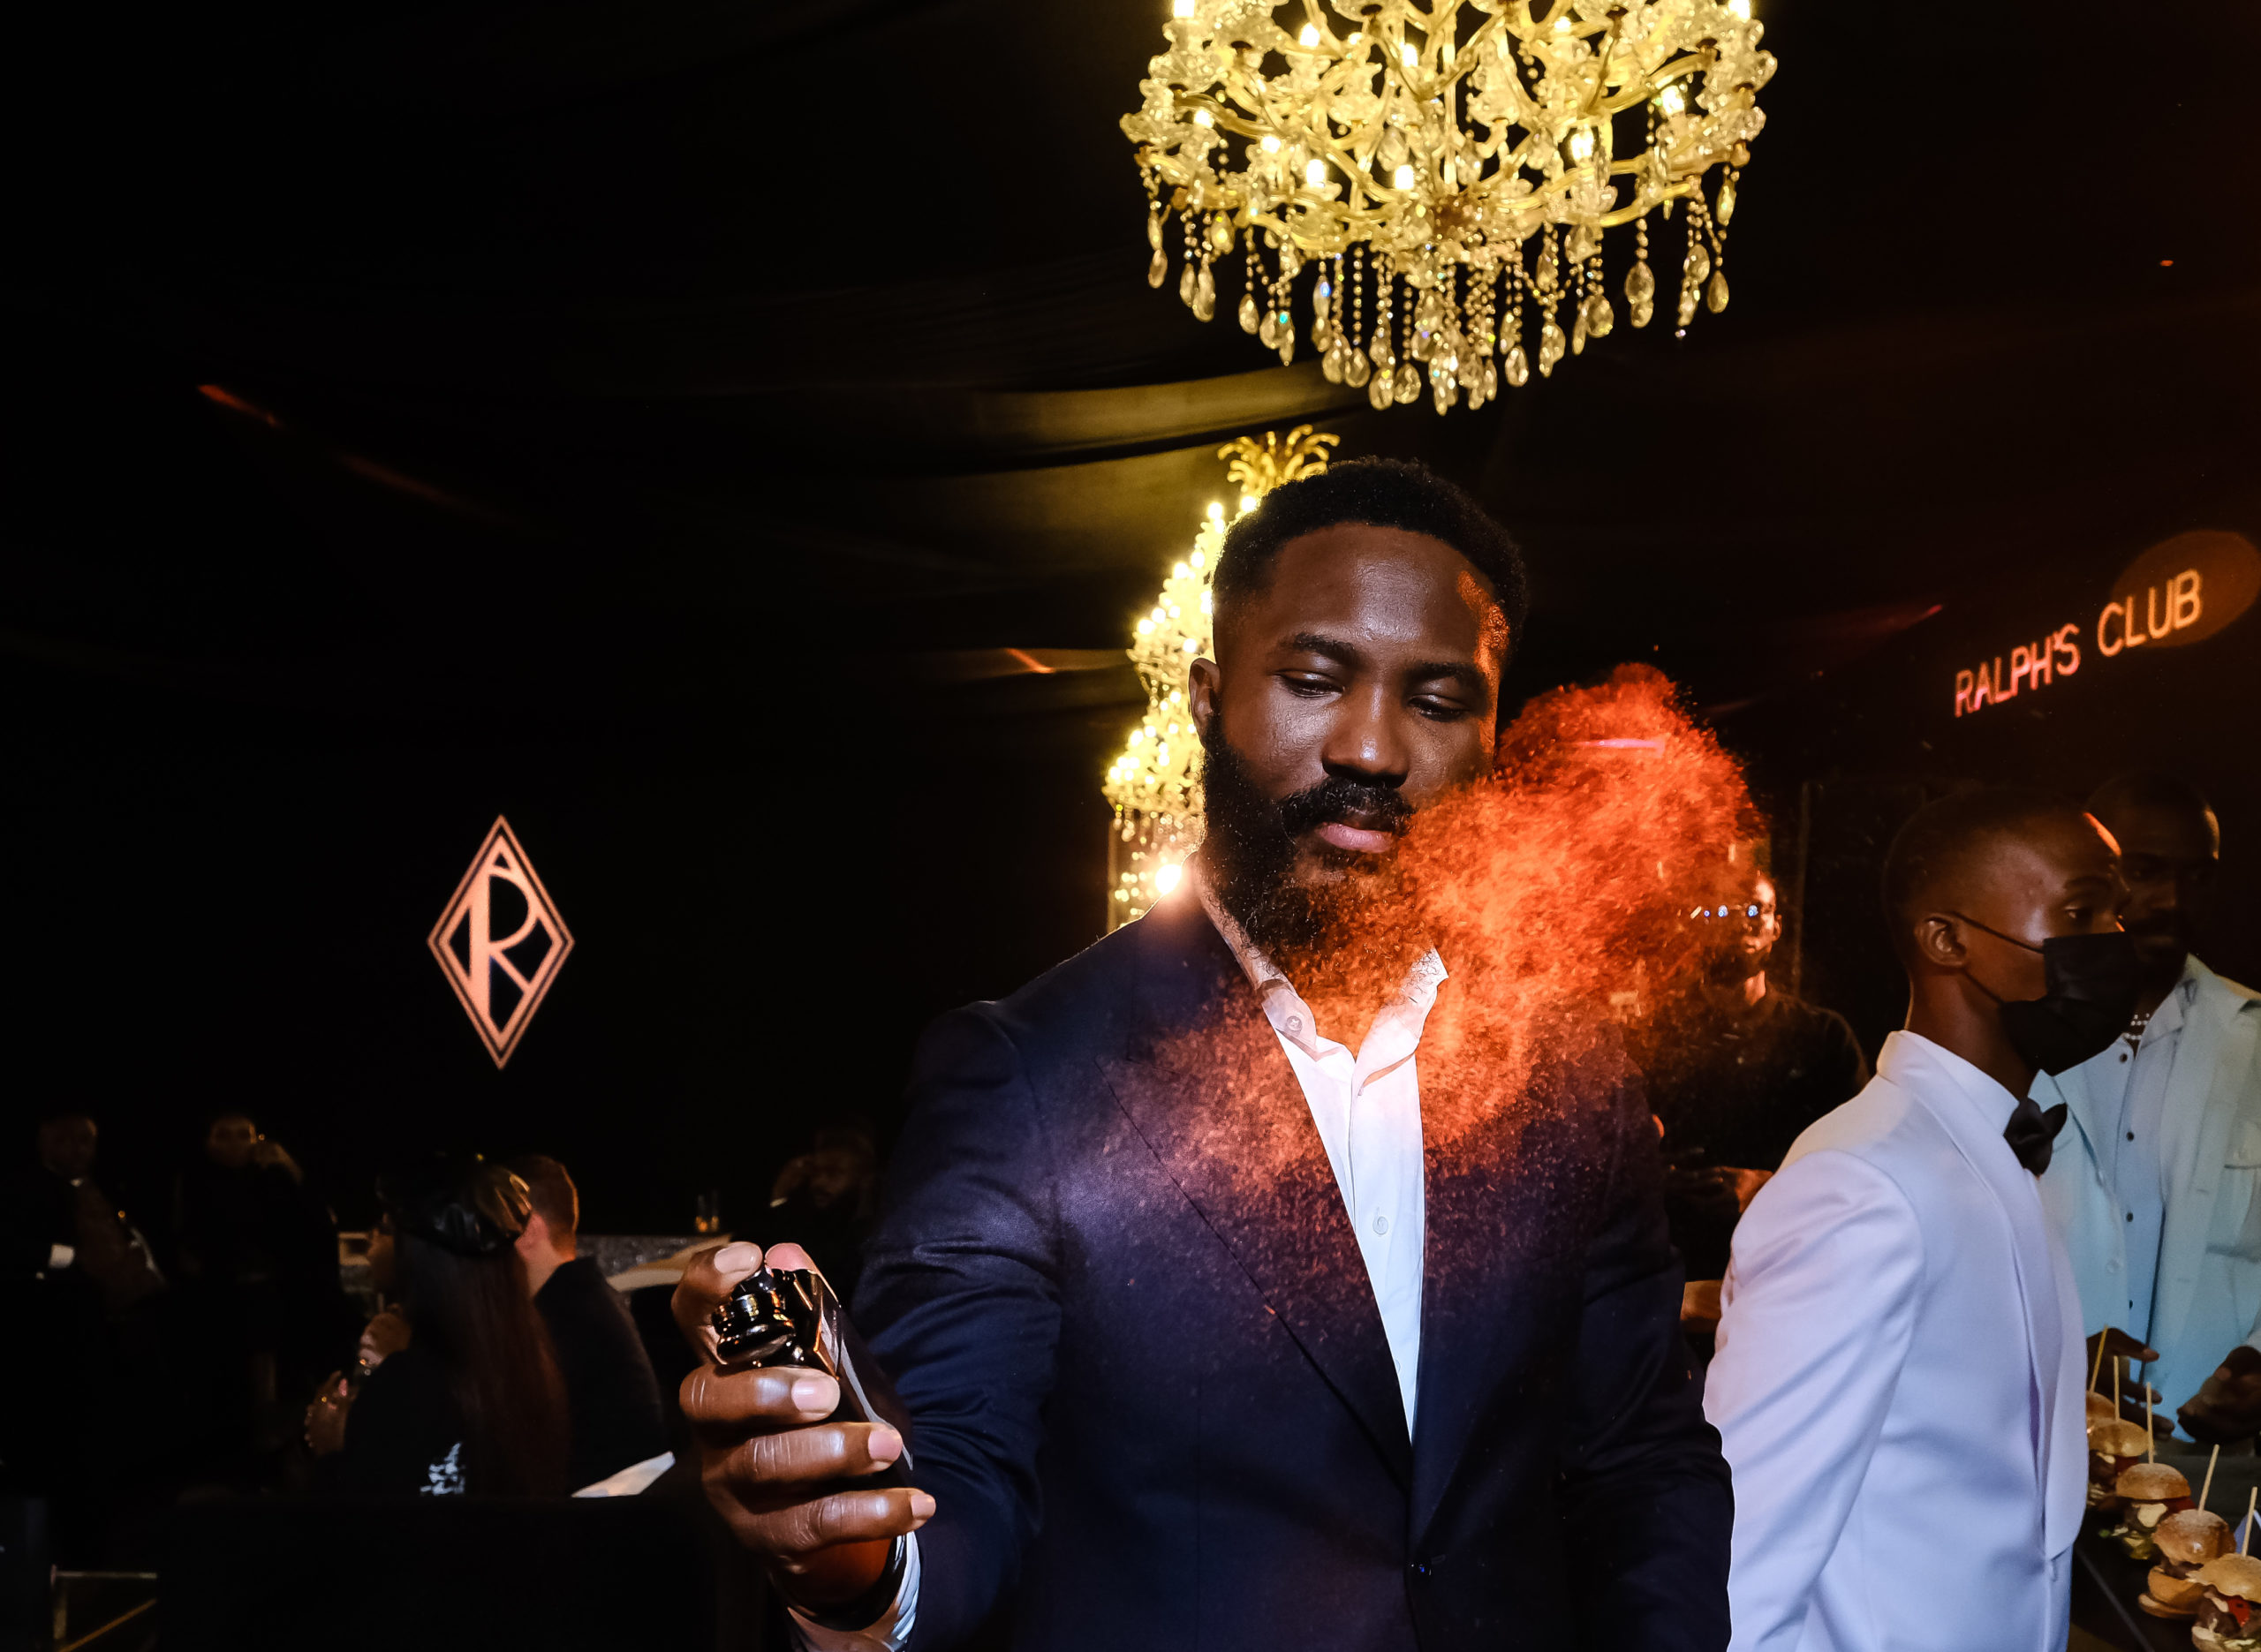 Ralph Lauren Fragrances Invites Mavericks of Style to the “Greatest Night”  of their Lives with the Launch of Ralph's Club in Lagos, Nigeria |  BellaNaija